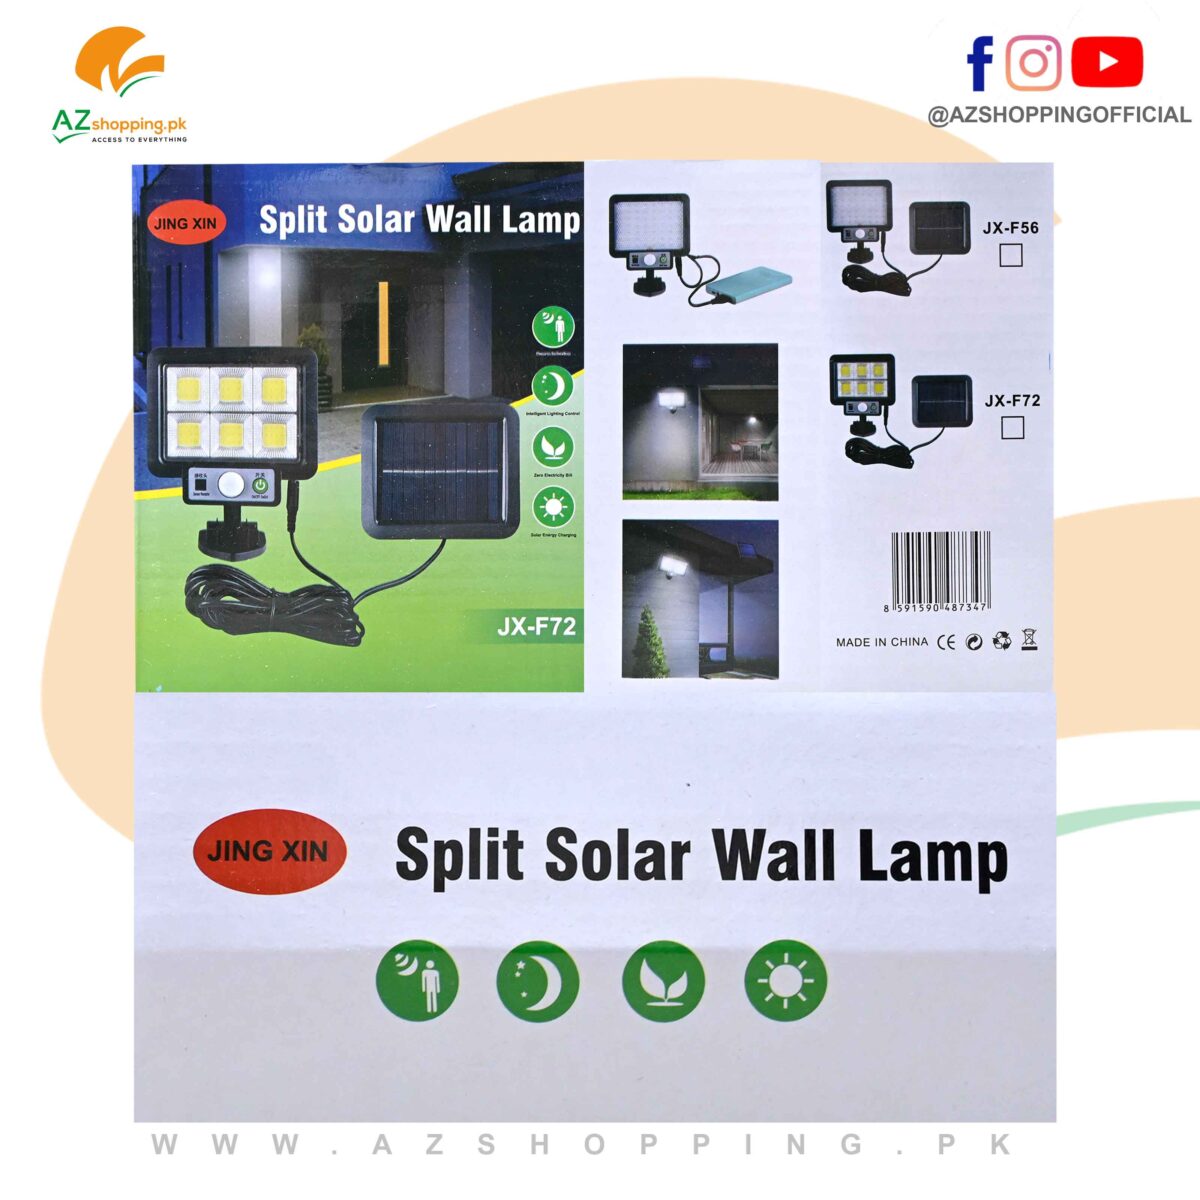 Split Solar Street LED Sensor Light Wall Lamp Flashlight, Zero Electricity Charges with Foldable Angle, Split Solar Rechargeable Battery, with Human Induction, Intelligent Lighting Control, Waterproof – Model: JX-F72